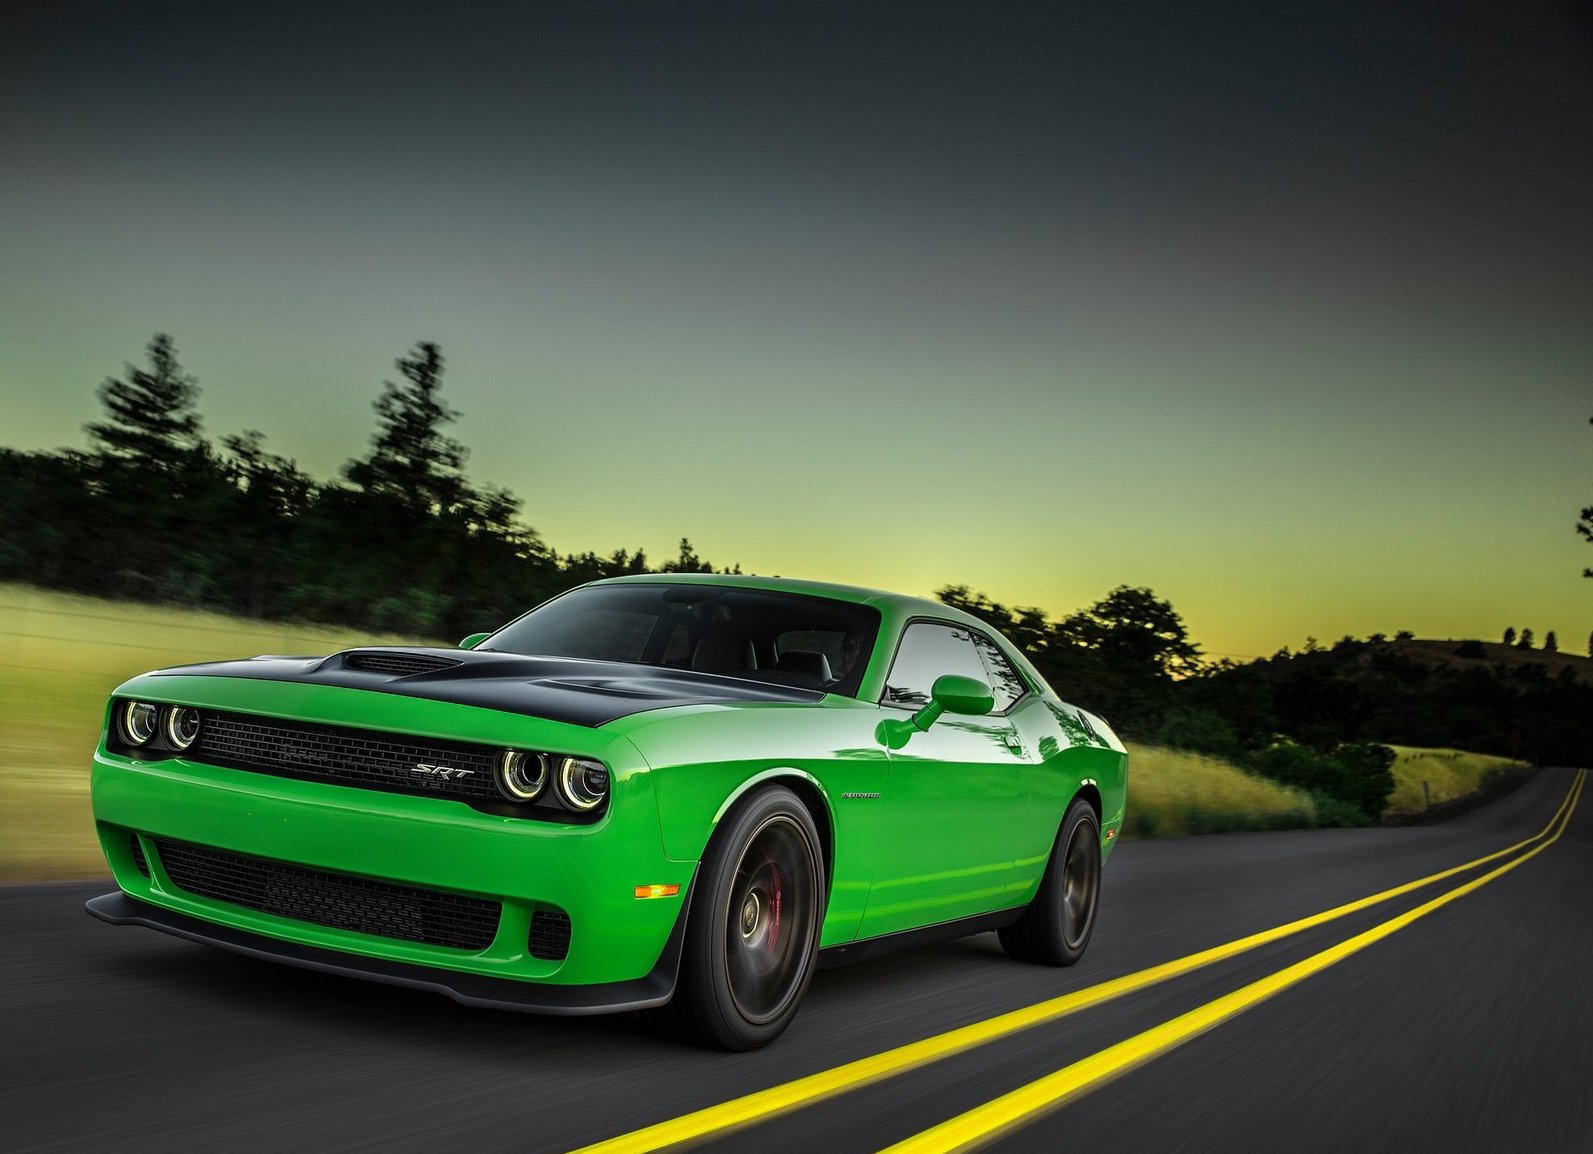 a bright green Dodge Challenger muscle car driving down a scene road at dusk